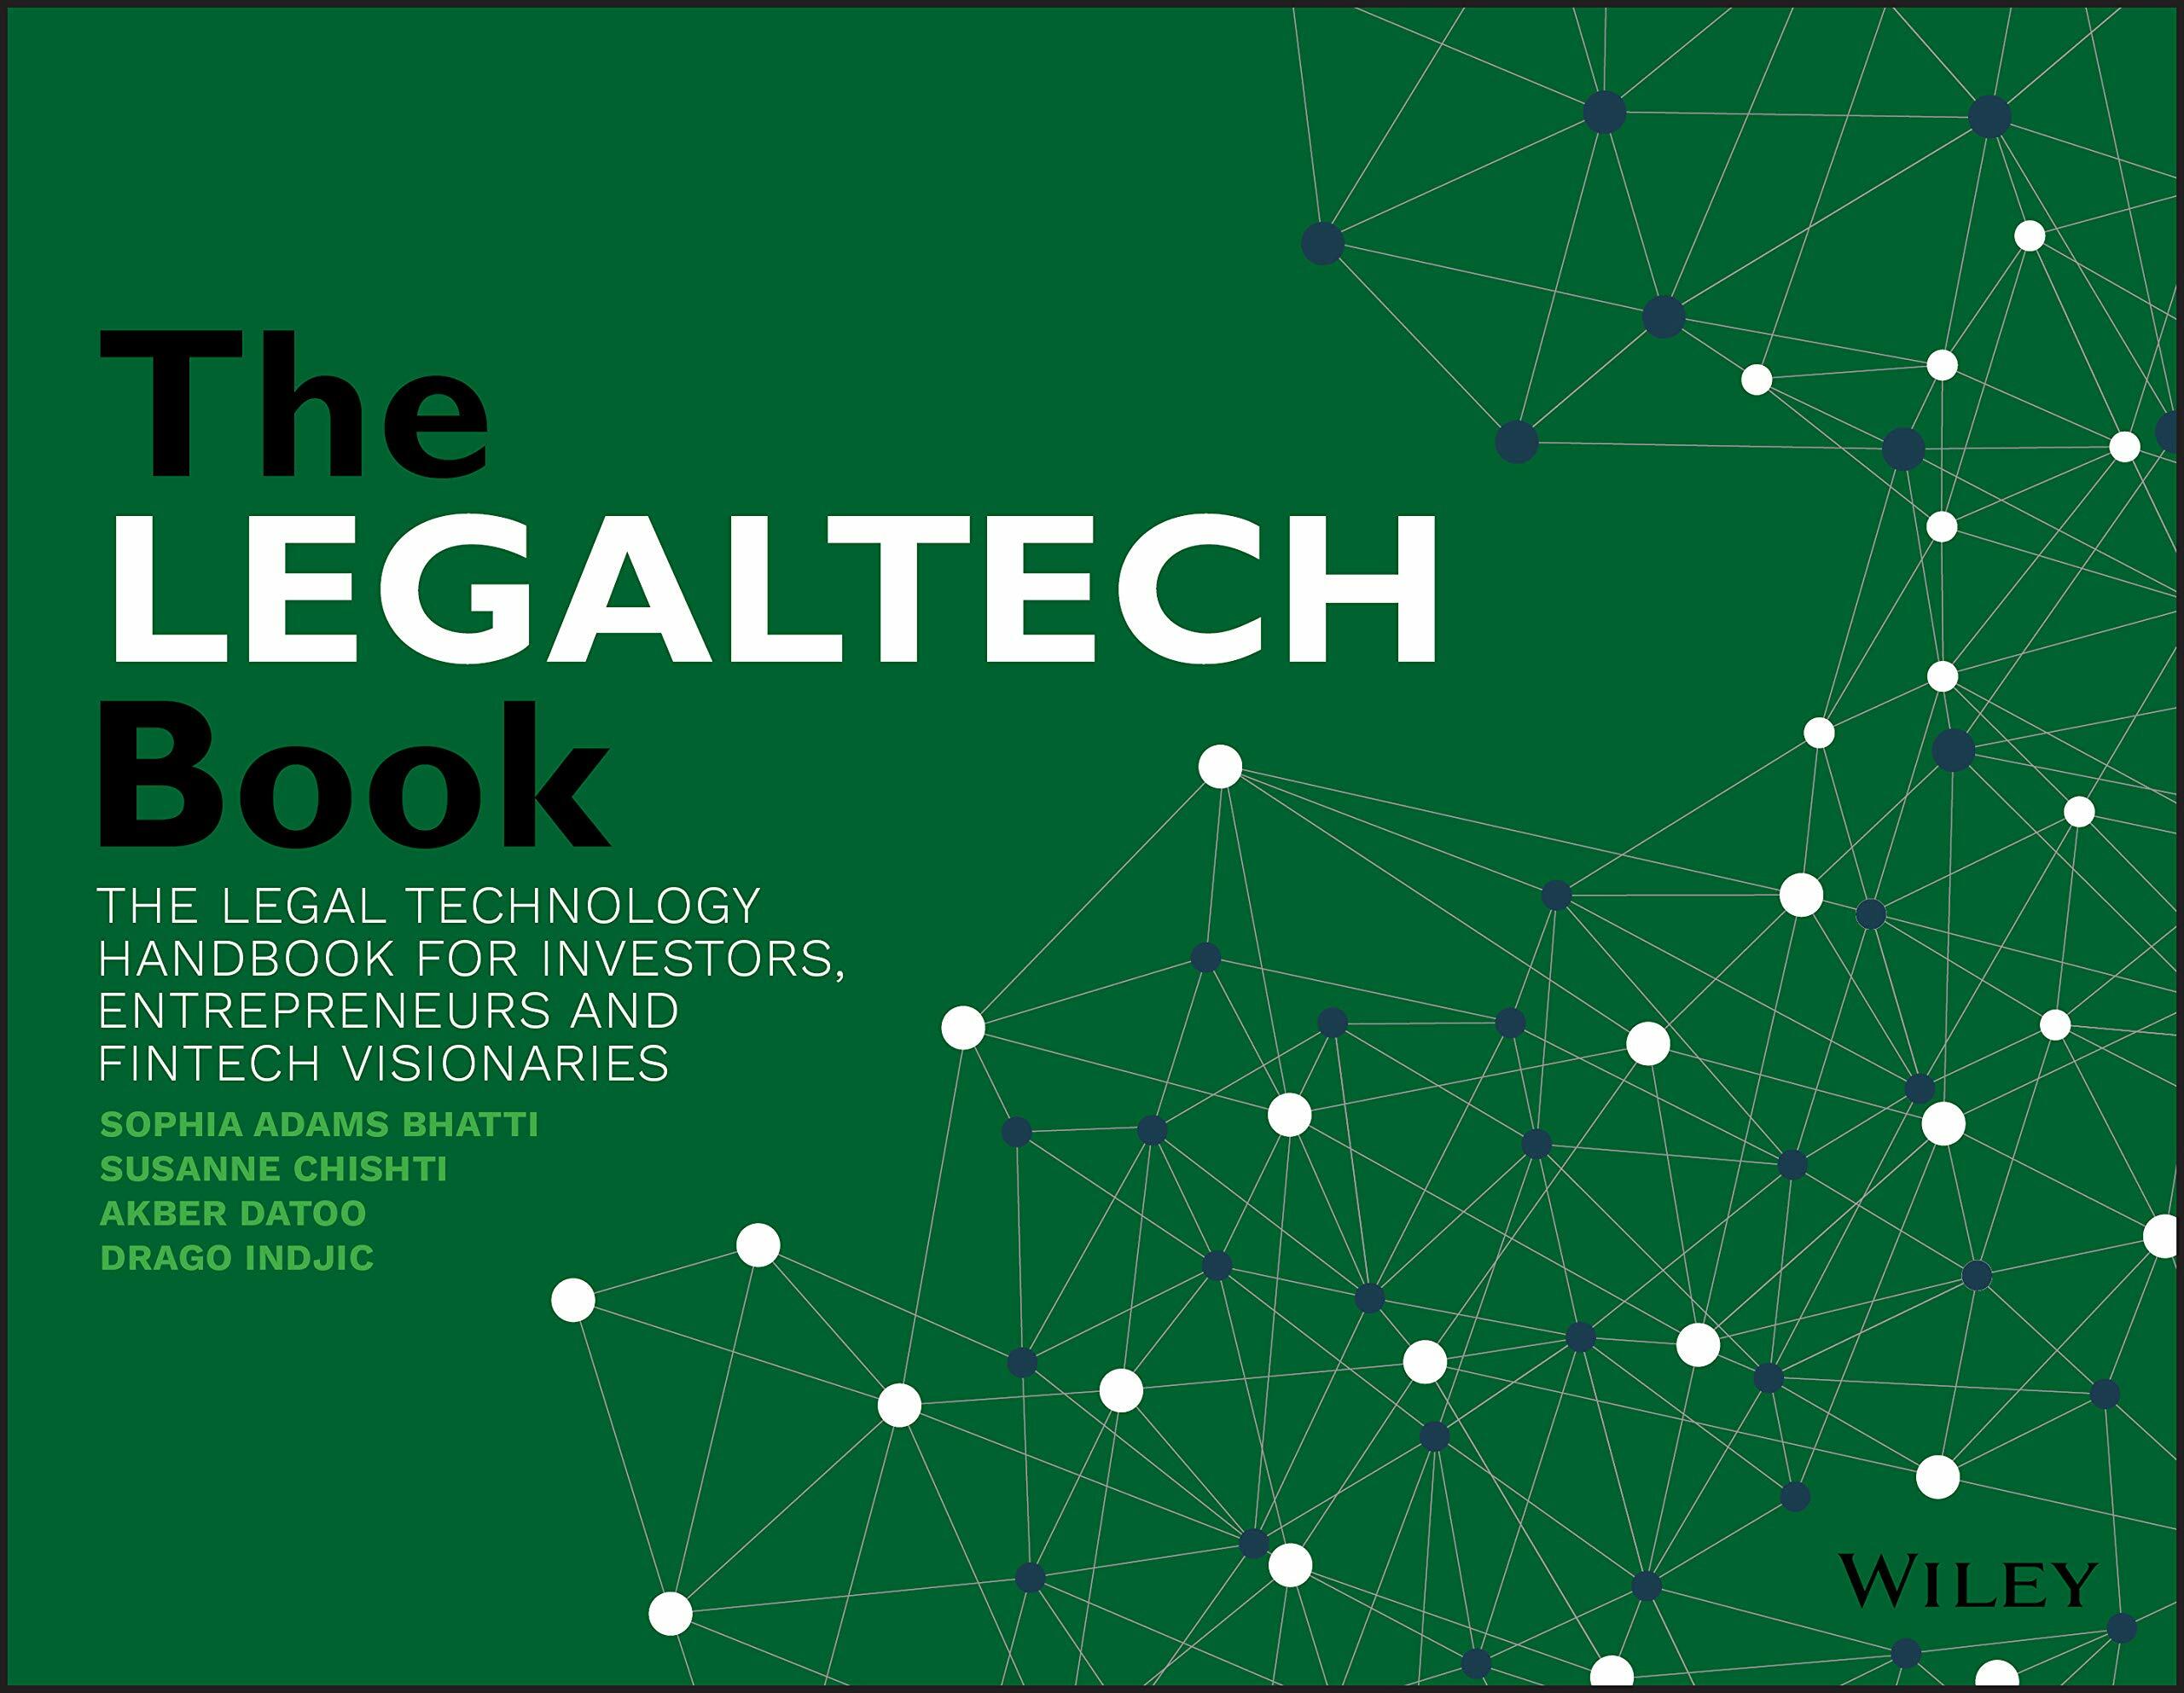 The Legaltech Book: The Legal Technology Handbook for Investors, Entrepreneurs and Fintech Visionaries (Paperback)